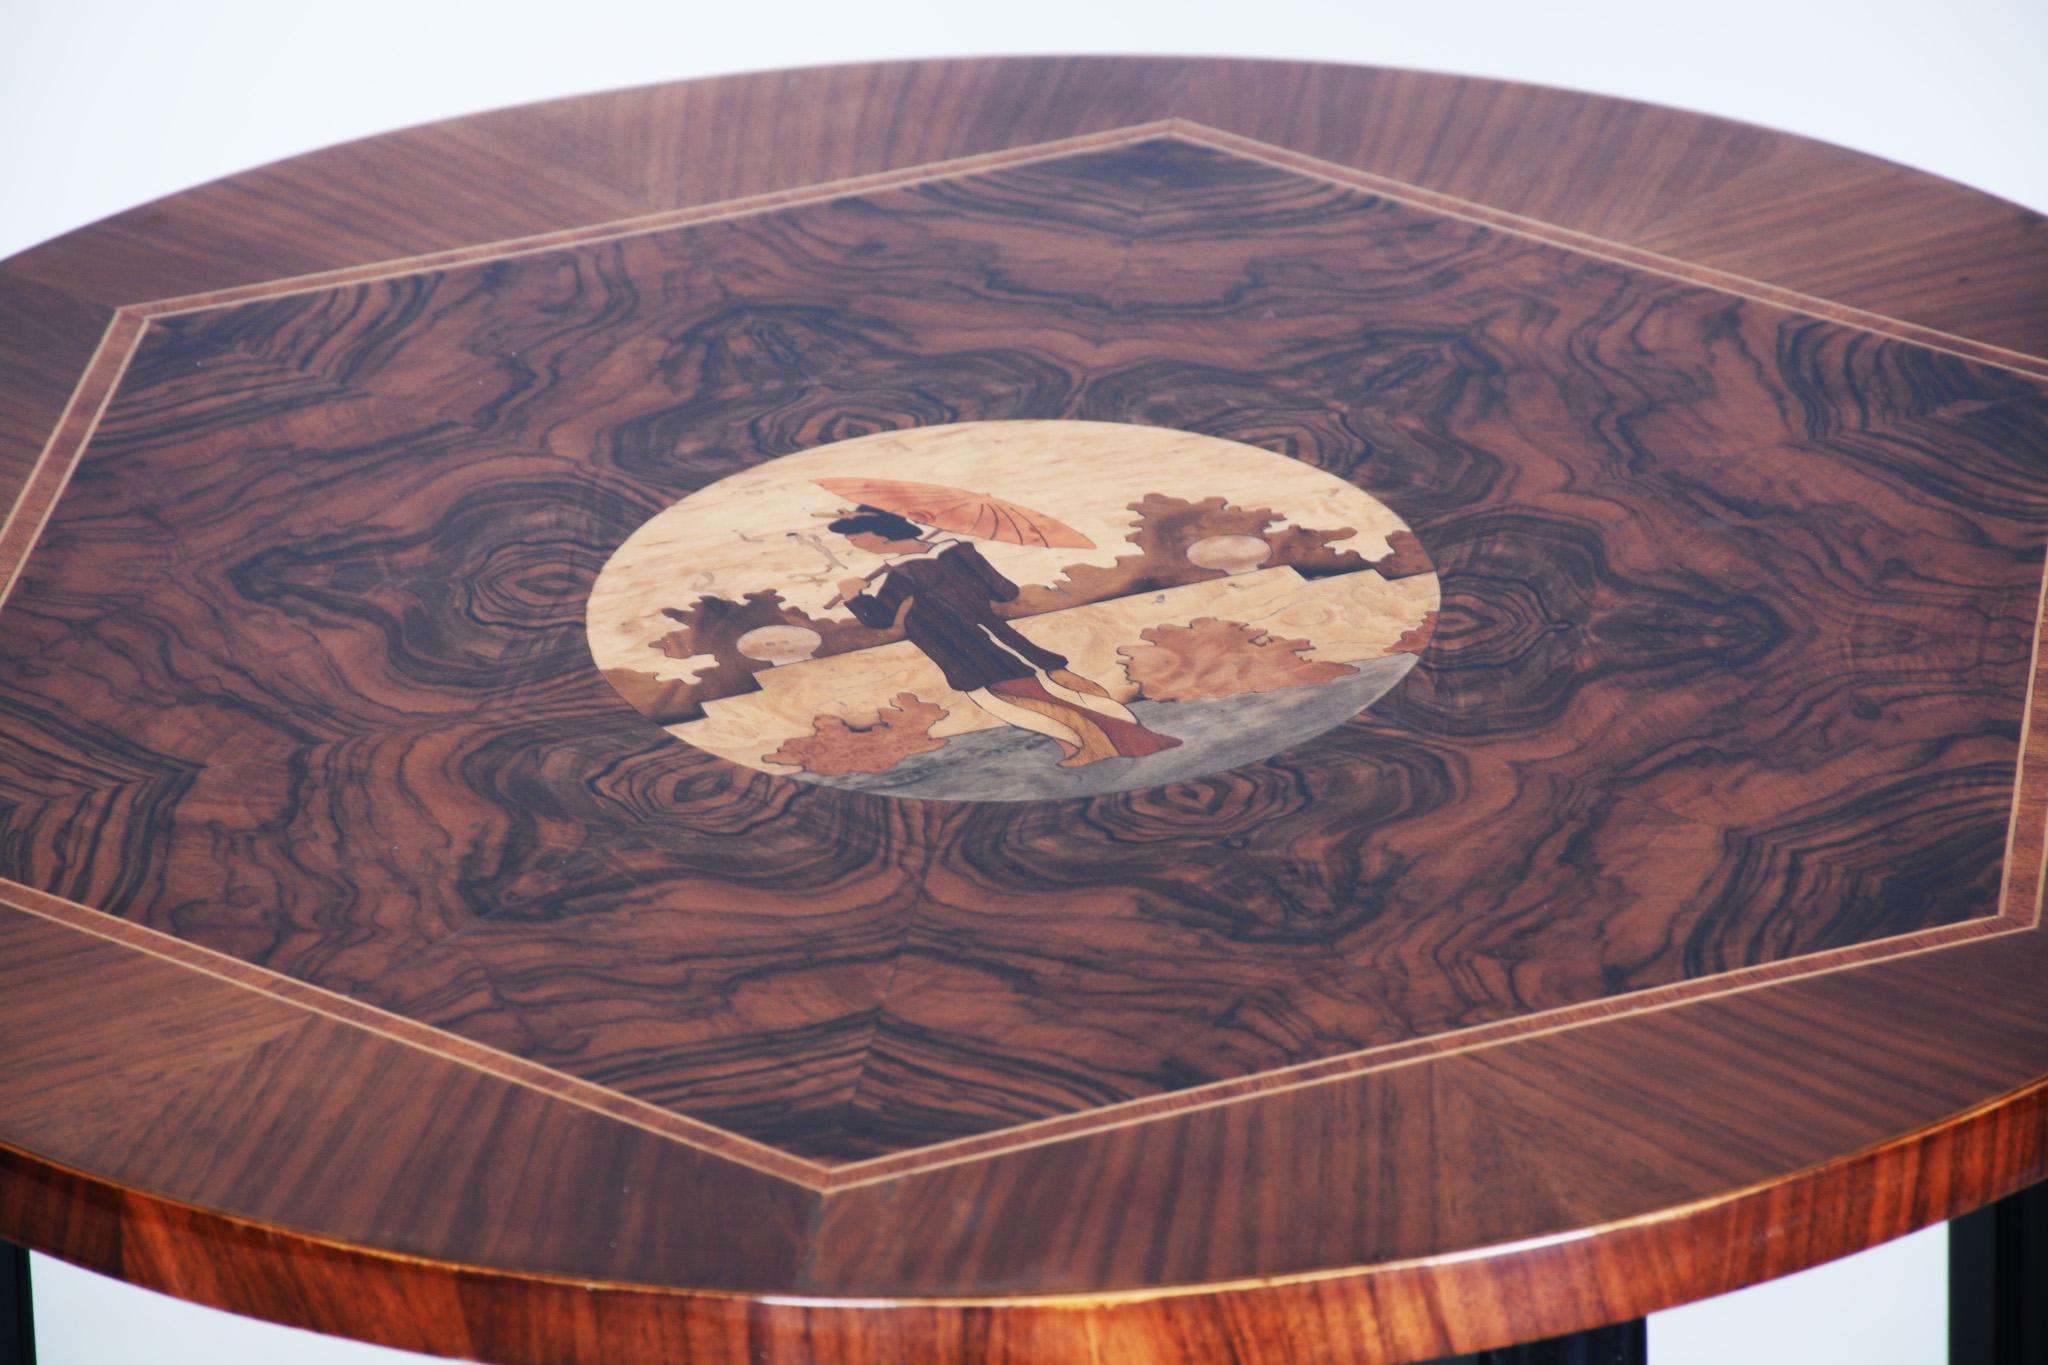 Wood Small Inlaid Art Deco Walnut Table from France, Asian Theme, Period 1930-1939